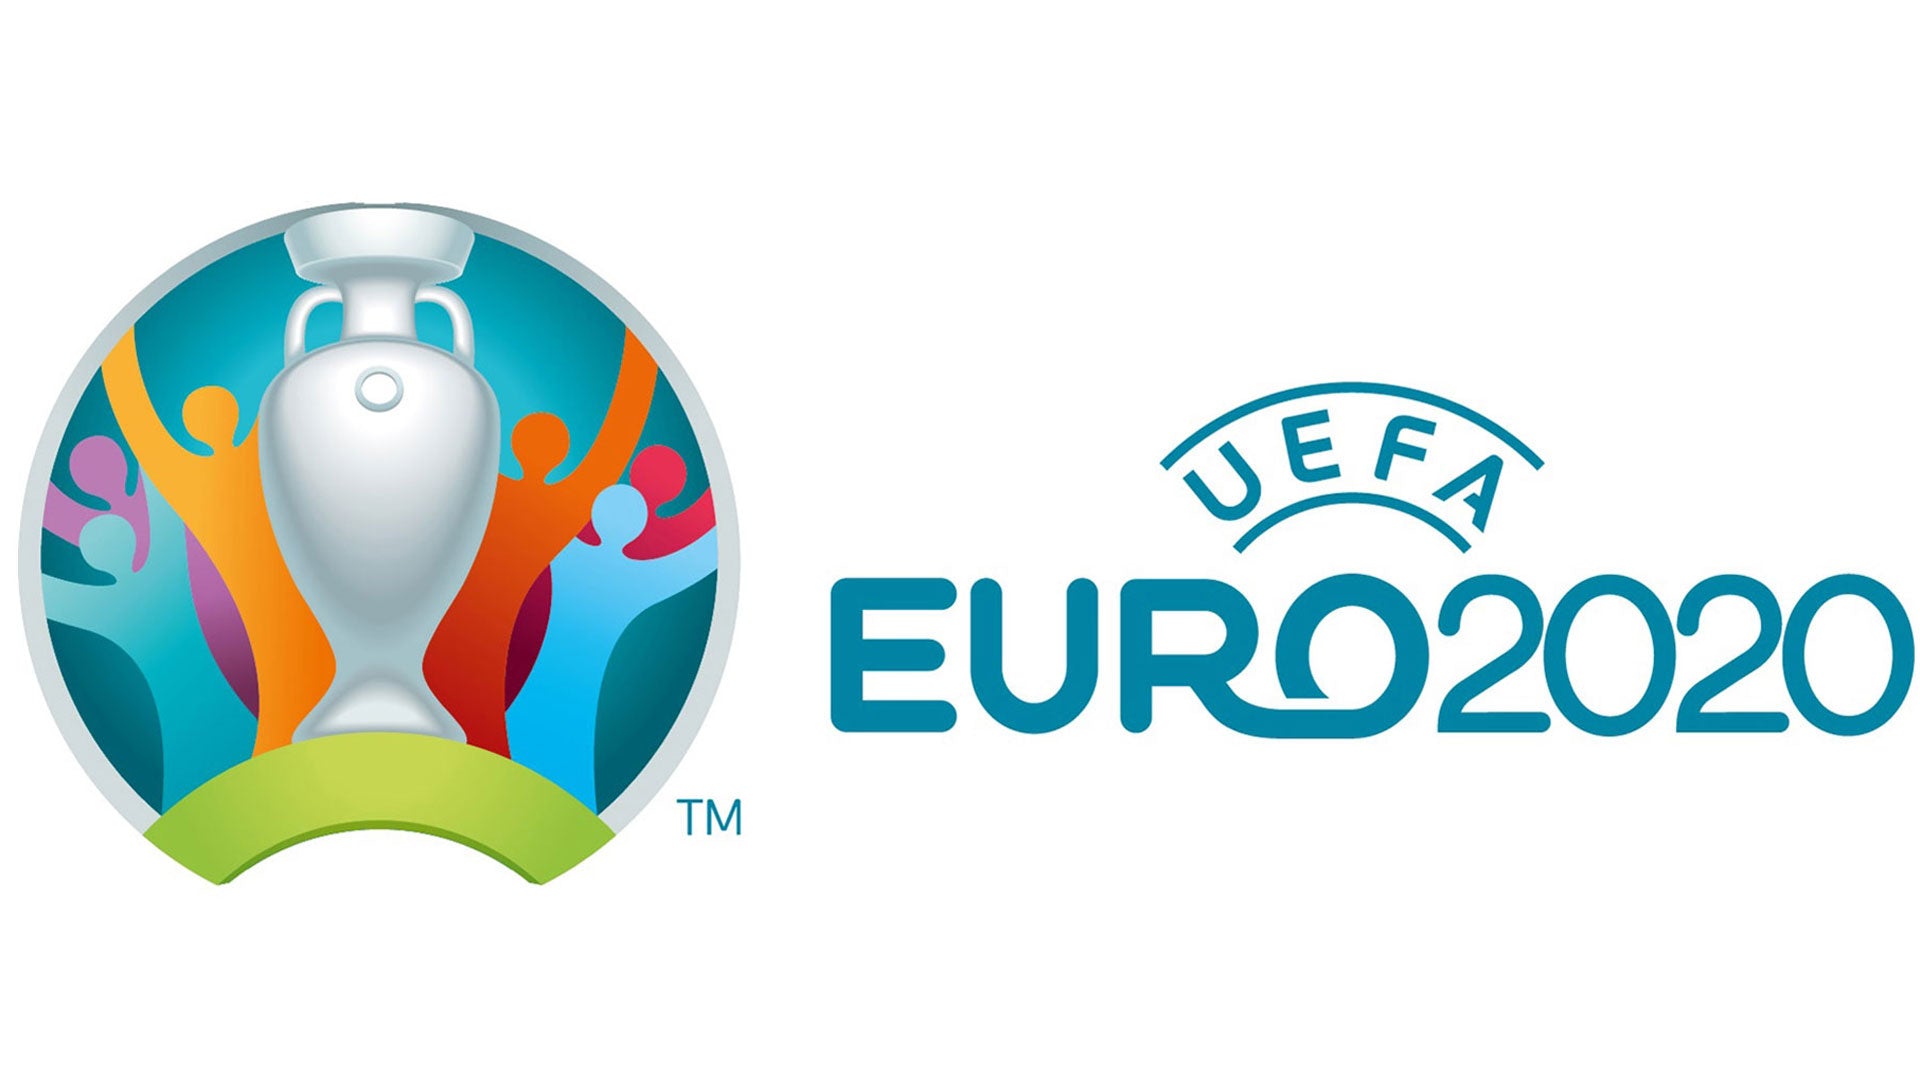 Are you ready for EURO 2020 ⚽